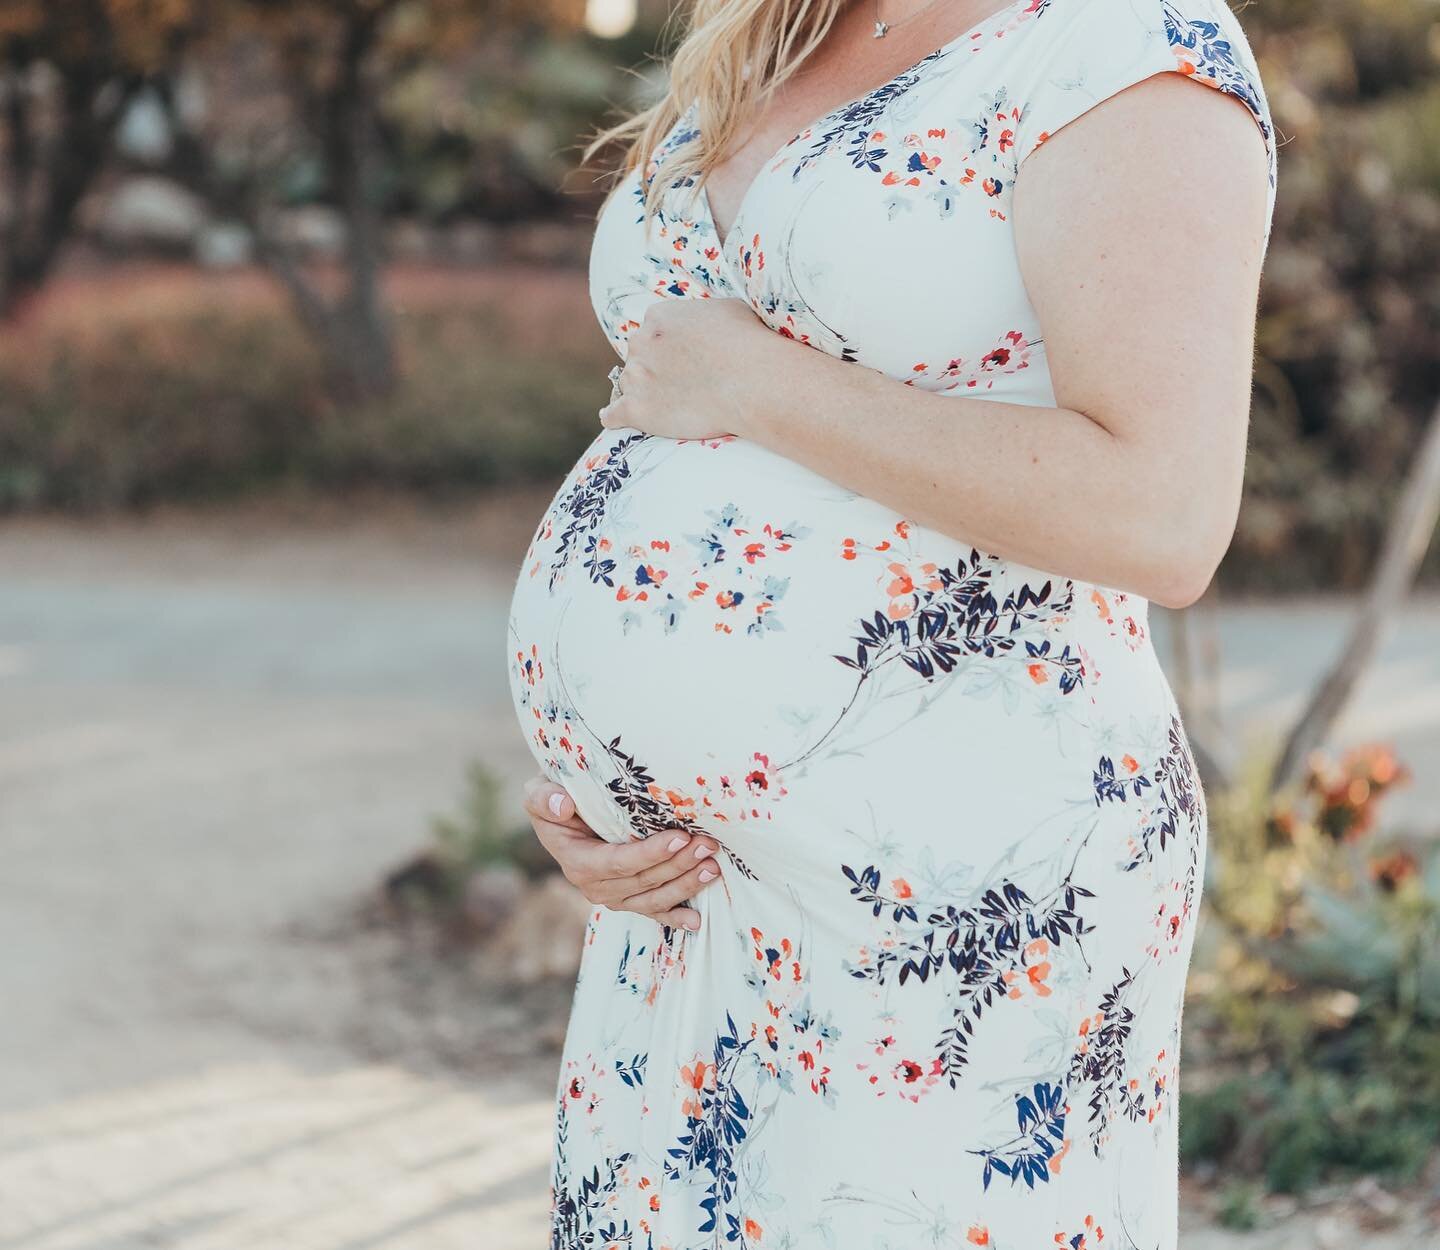 Let's share some funny stories from pregnancy, I'll go first: I never considered choosing a parking spot carefully until I was pregnant. One day a car parked close to my car in a lot. I thought I could just squeeze into my car door but quickly found 